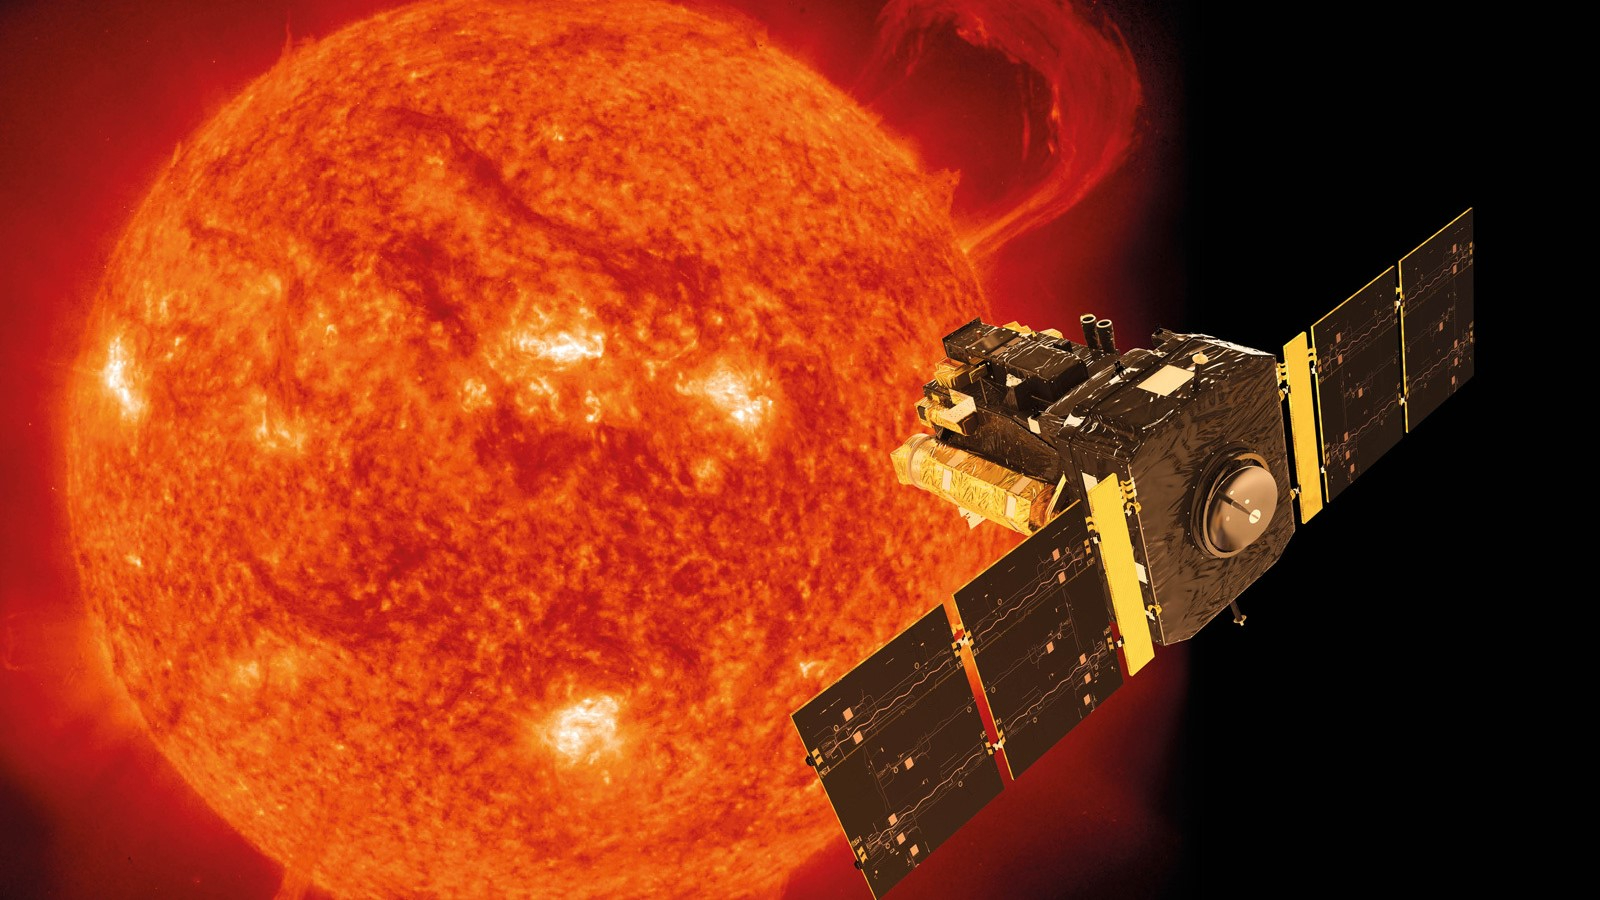 Artist's illustration of the SOHO spacecraft with the sun in the background.